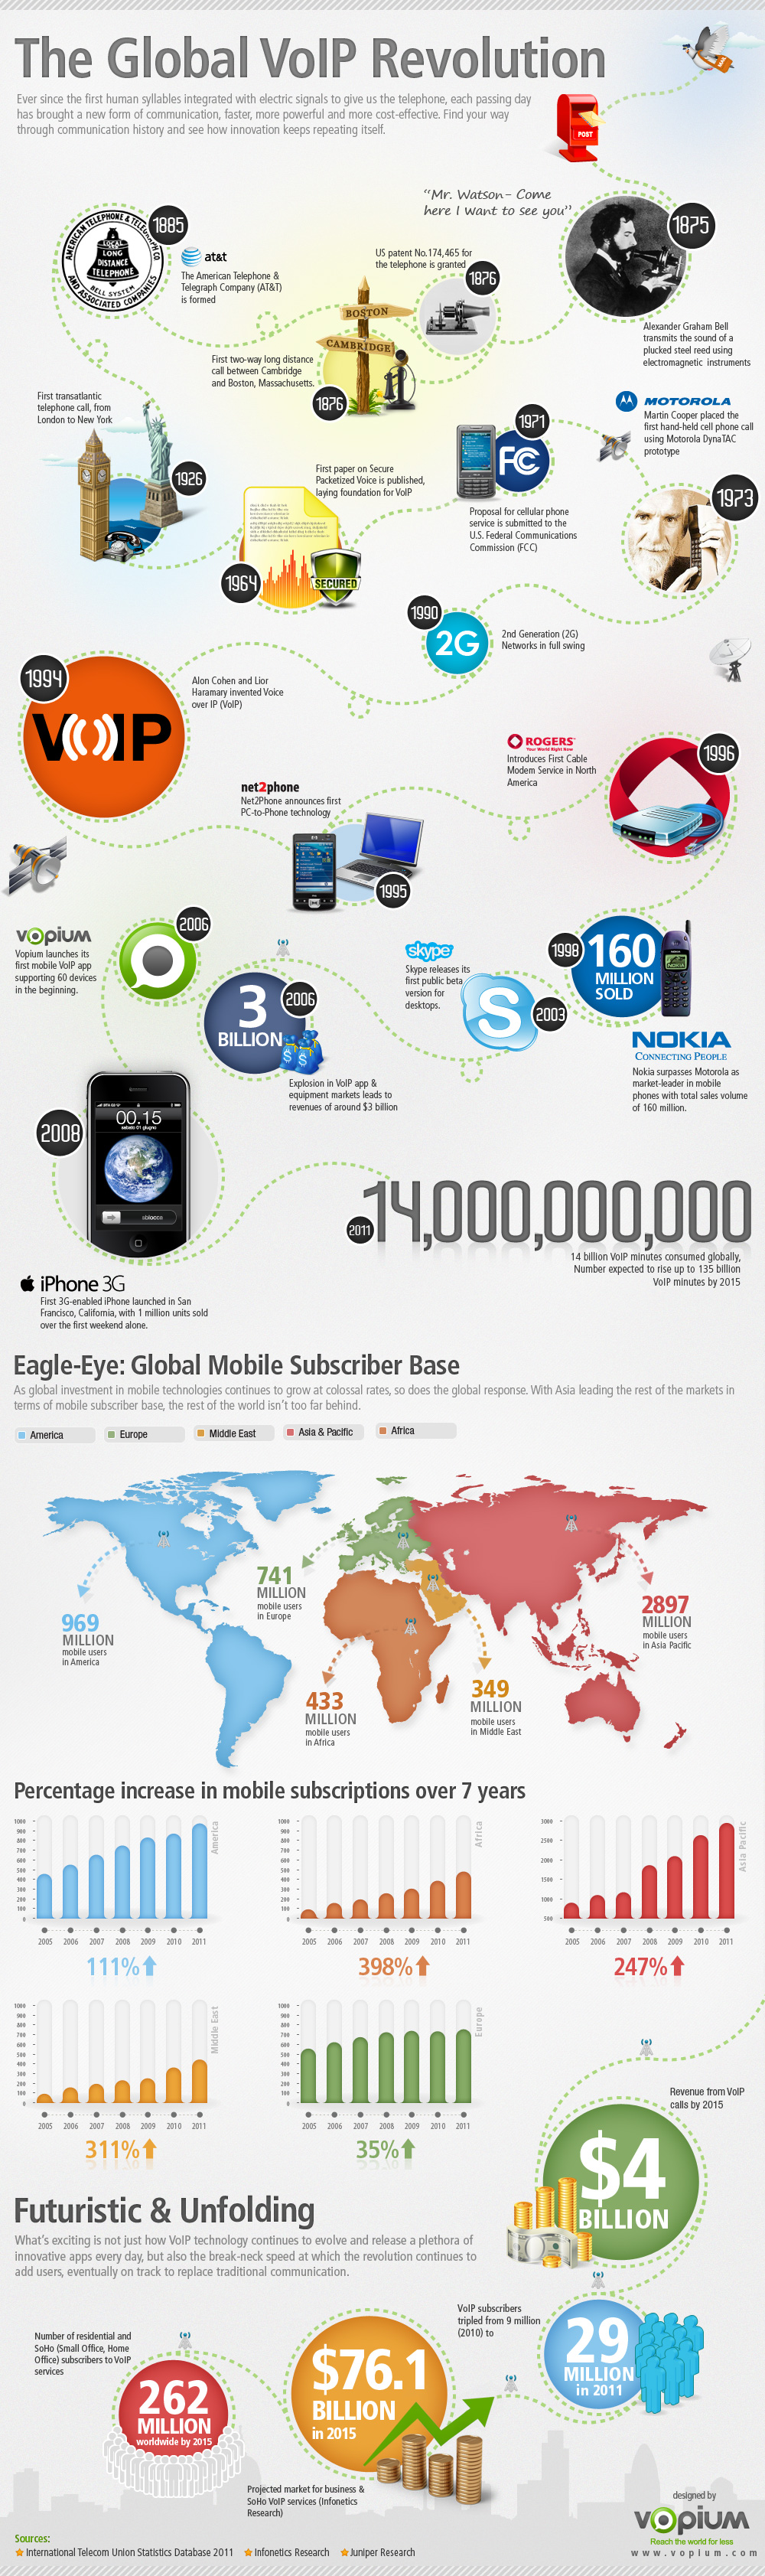 The Global VoIP Revolution